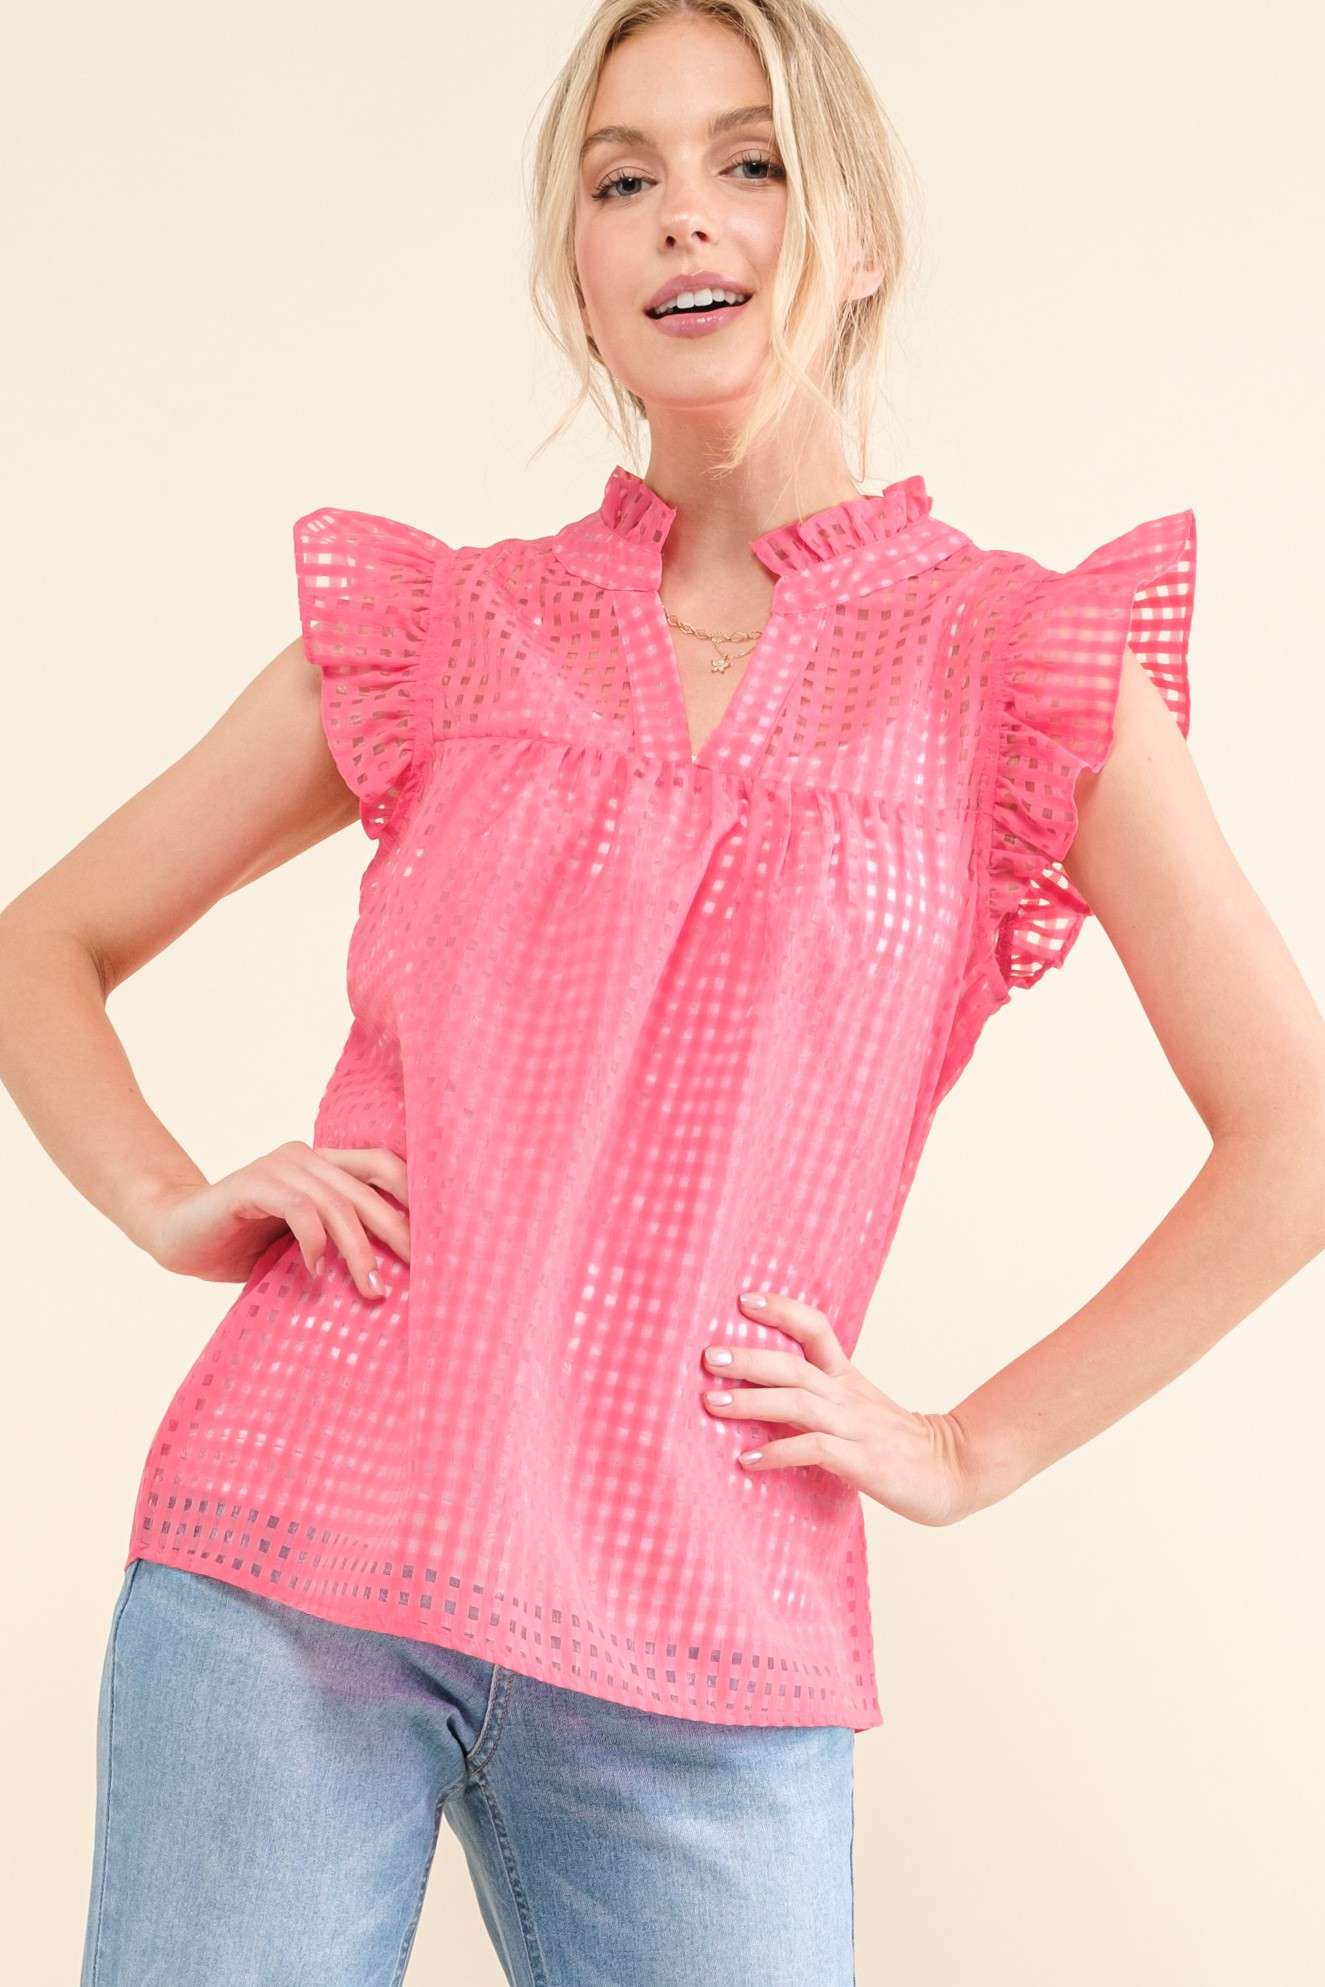 Sheer Gridded Baby Doll Ruffled Top - Pink